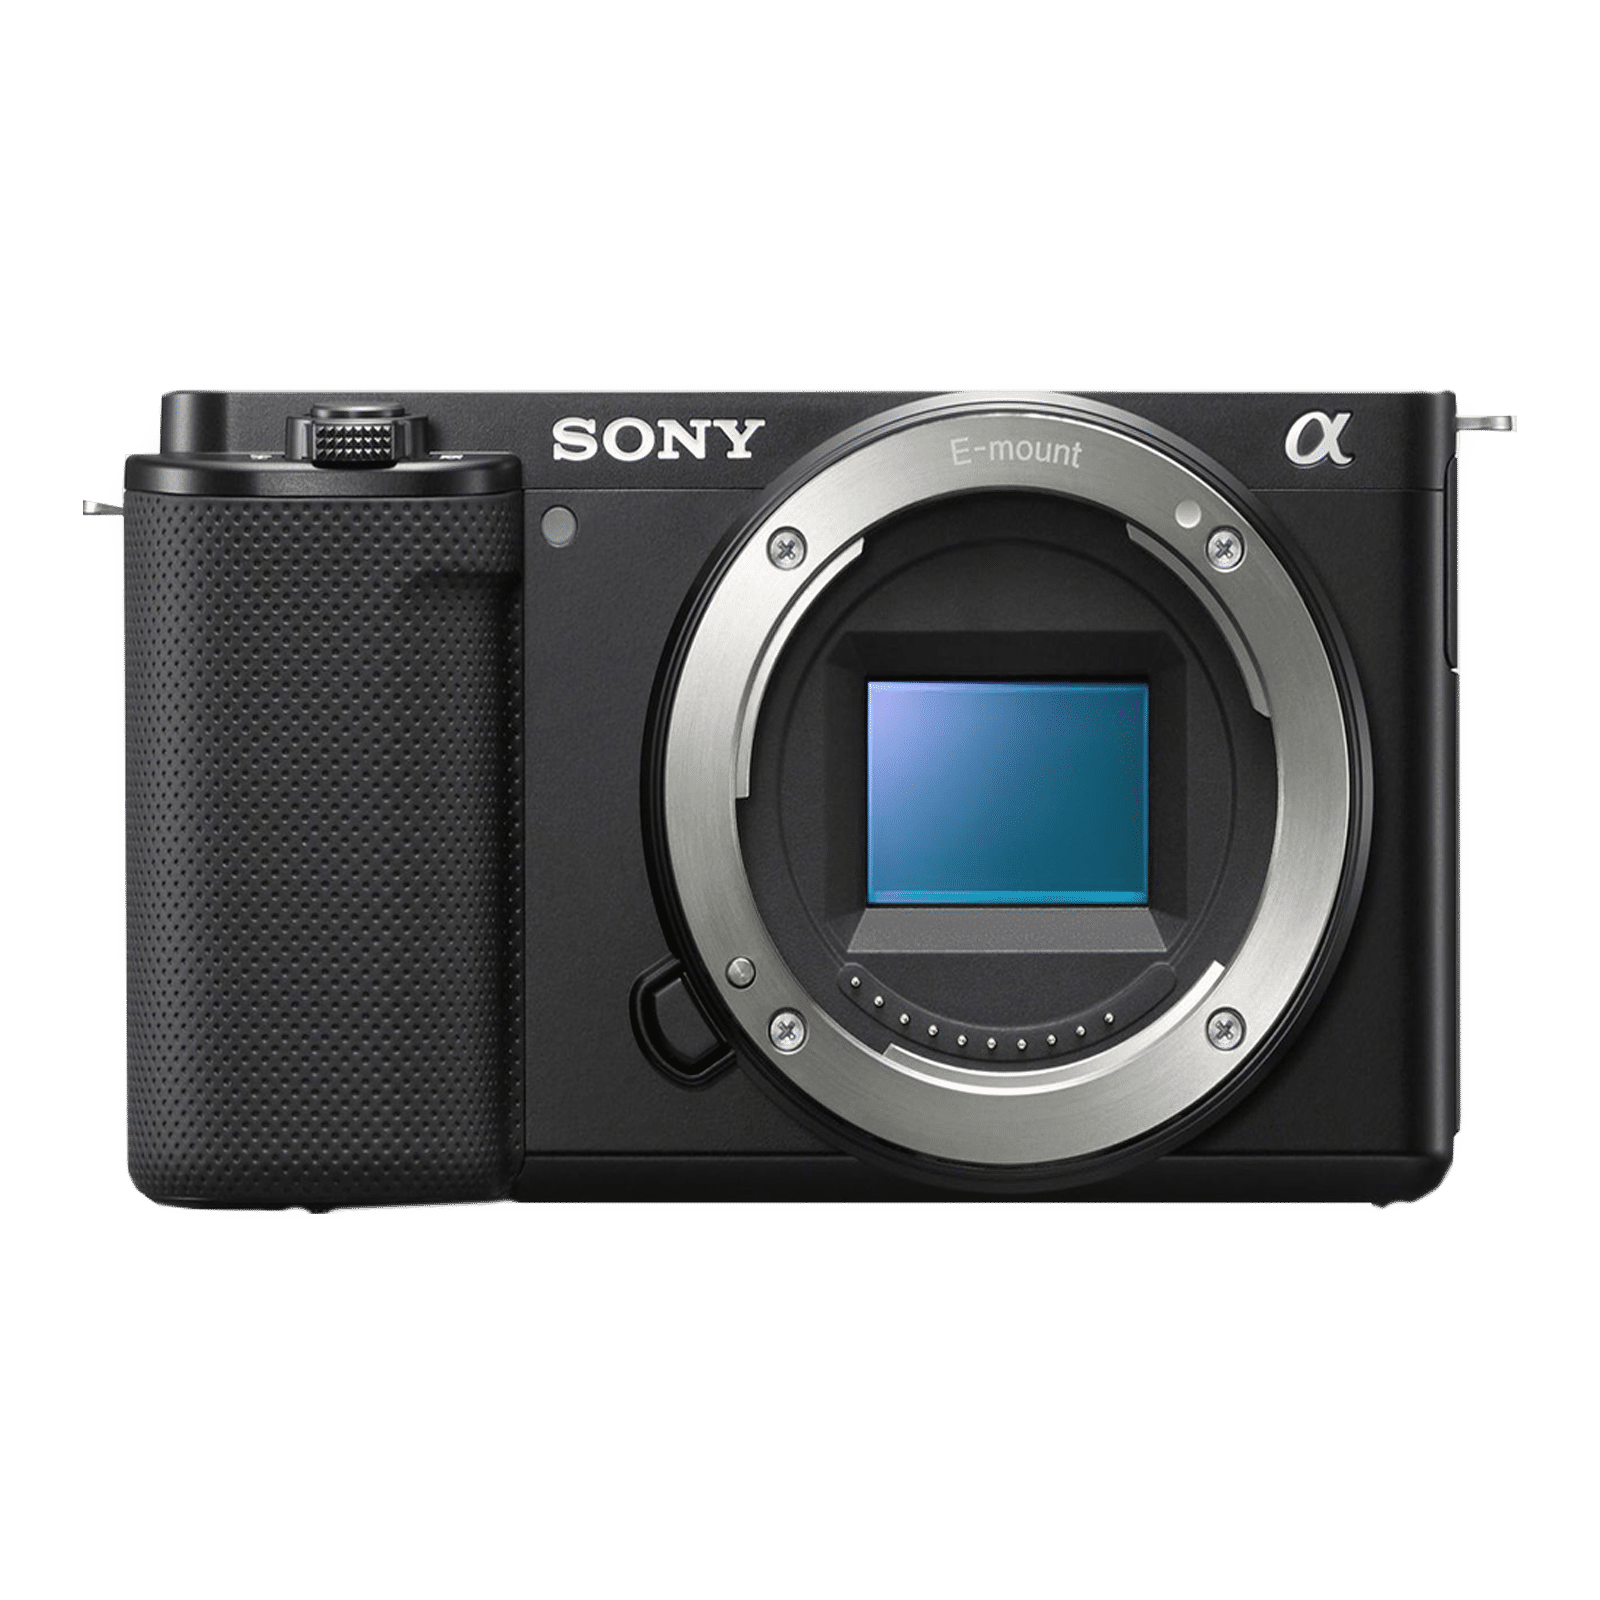 Sony Alpha 6700 – APS-C Interchangeable Lens Hybrid Camera with 18